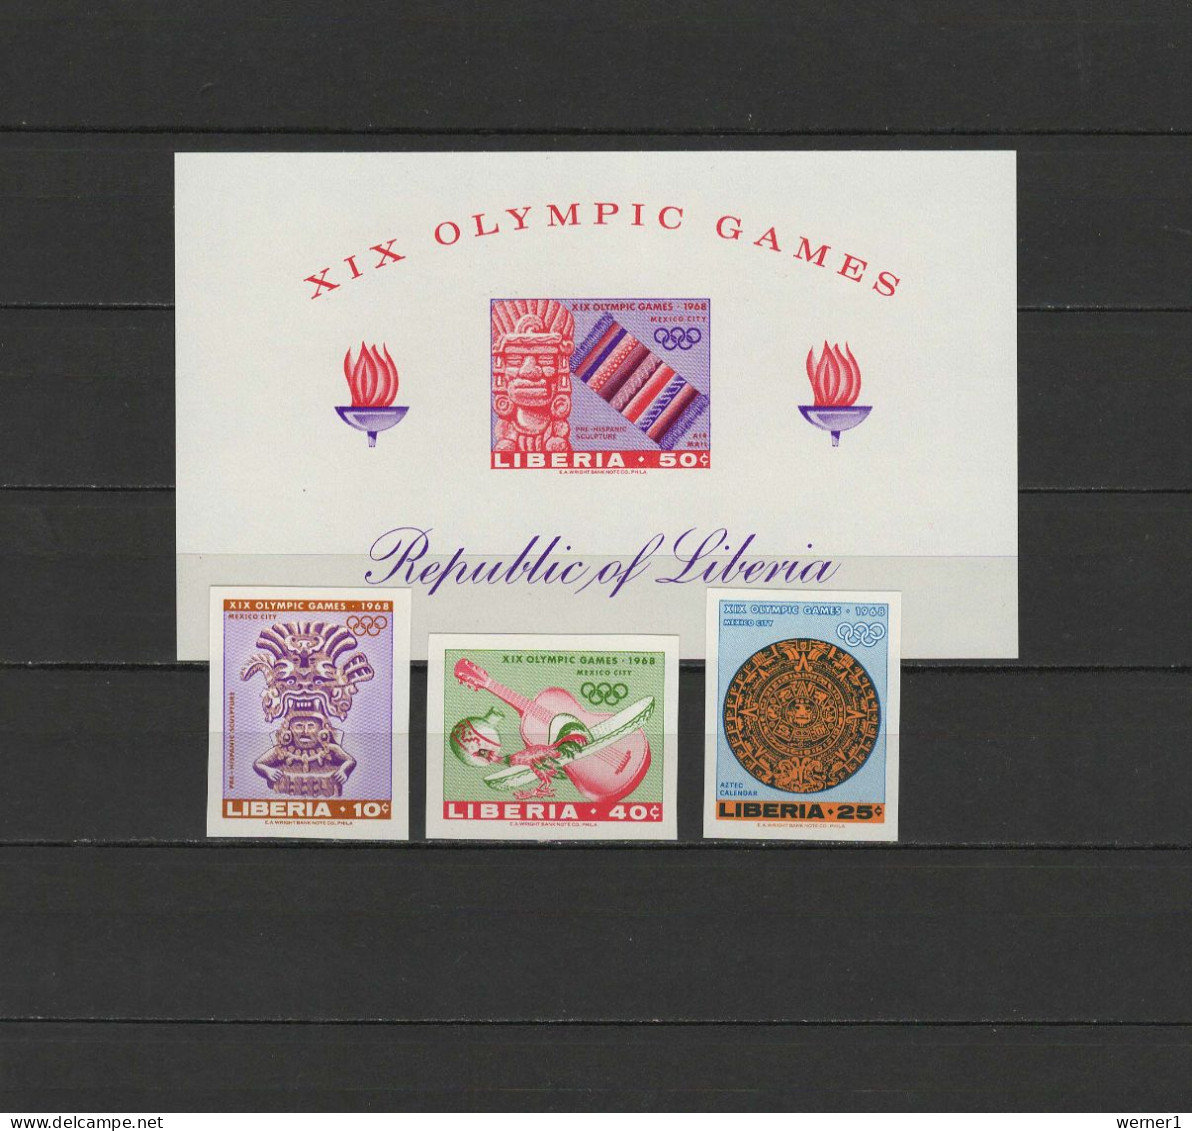 Liberia 1967 Olympic Games Mexico, Set Of 3 + S/s Imperf. MNH -scarce- - Sommer 1968: Mexico